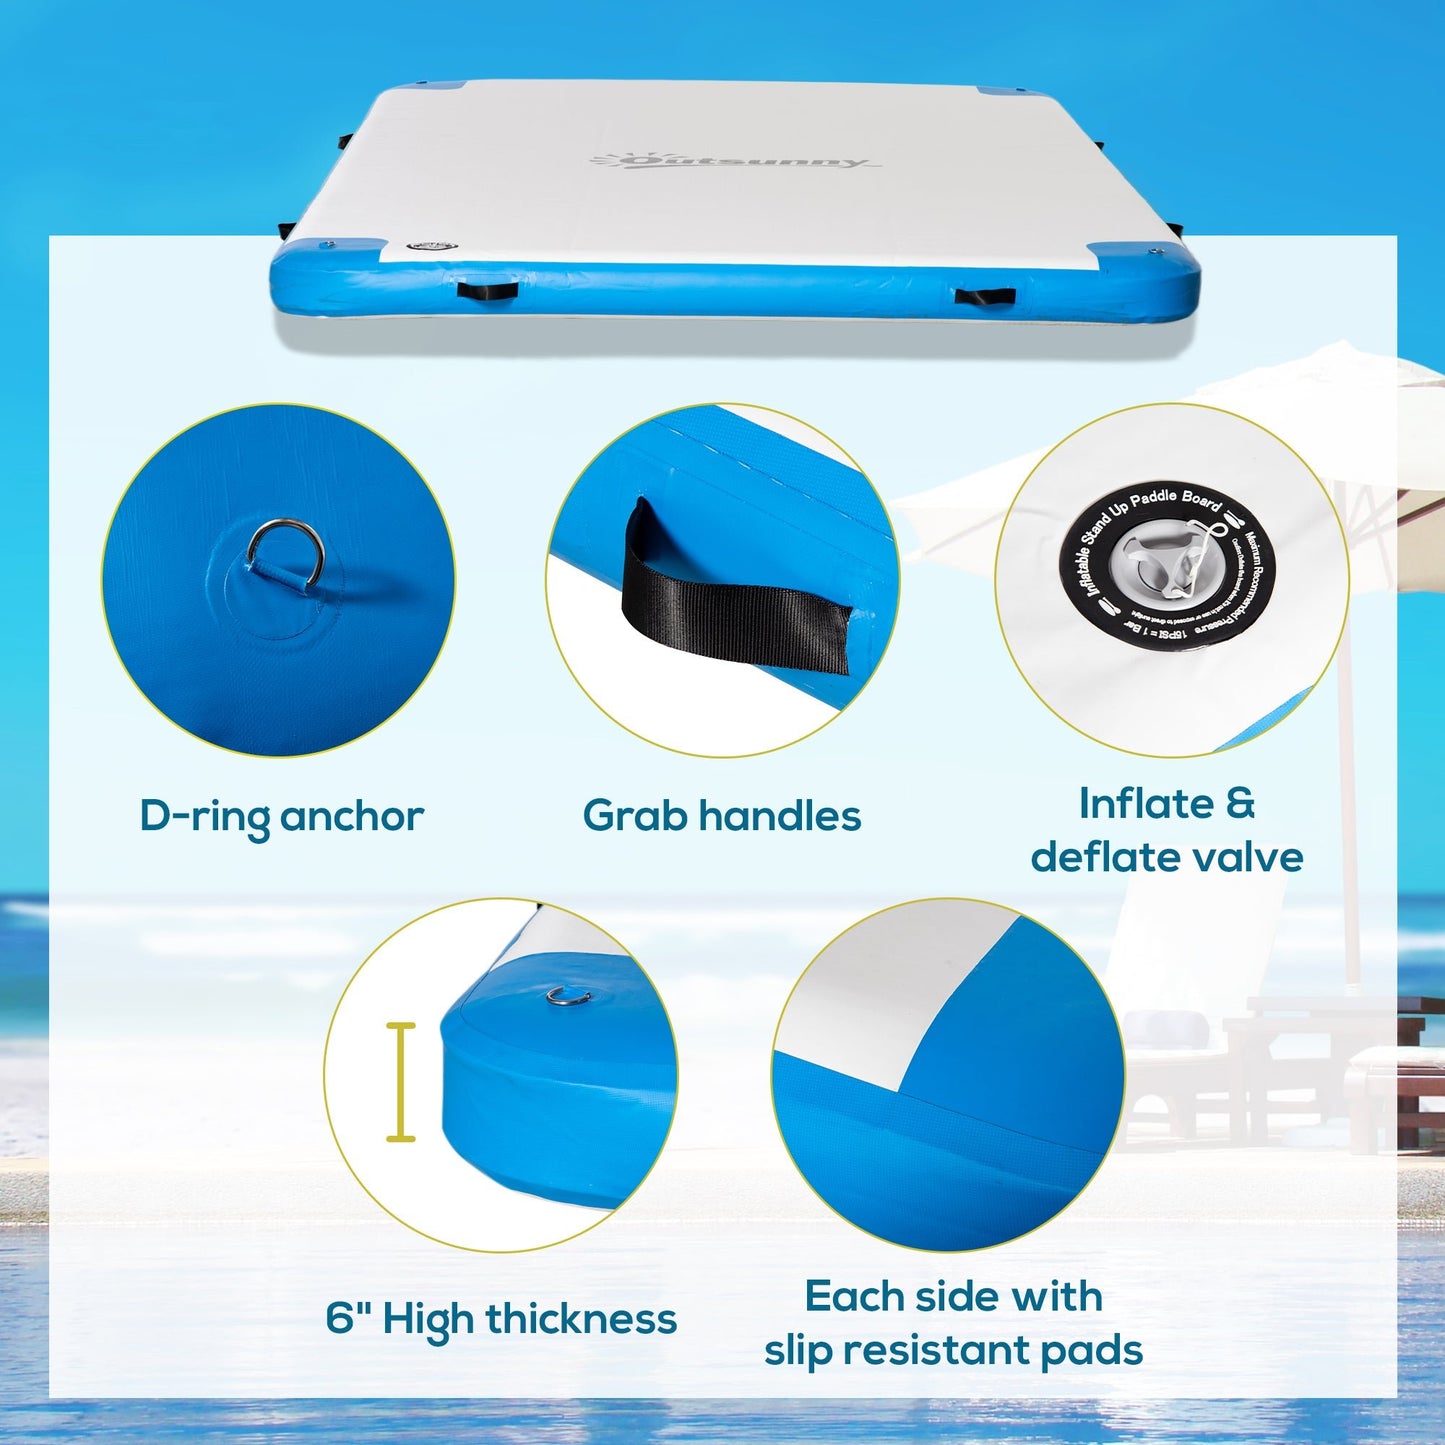 Miscellaneous-Water Inflatable Floating Dock, Inflatable Platform Island, Large Floating Mat Raft with Air Pump & Backpack, for Pool, Beach, Ocean, White - Blue - Outdoor Style Company